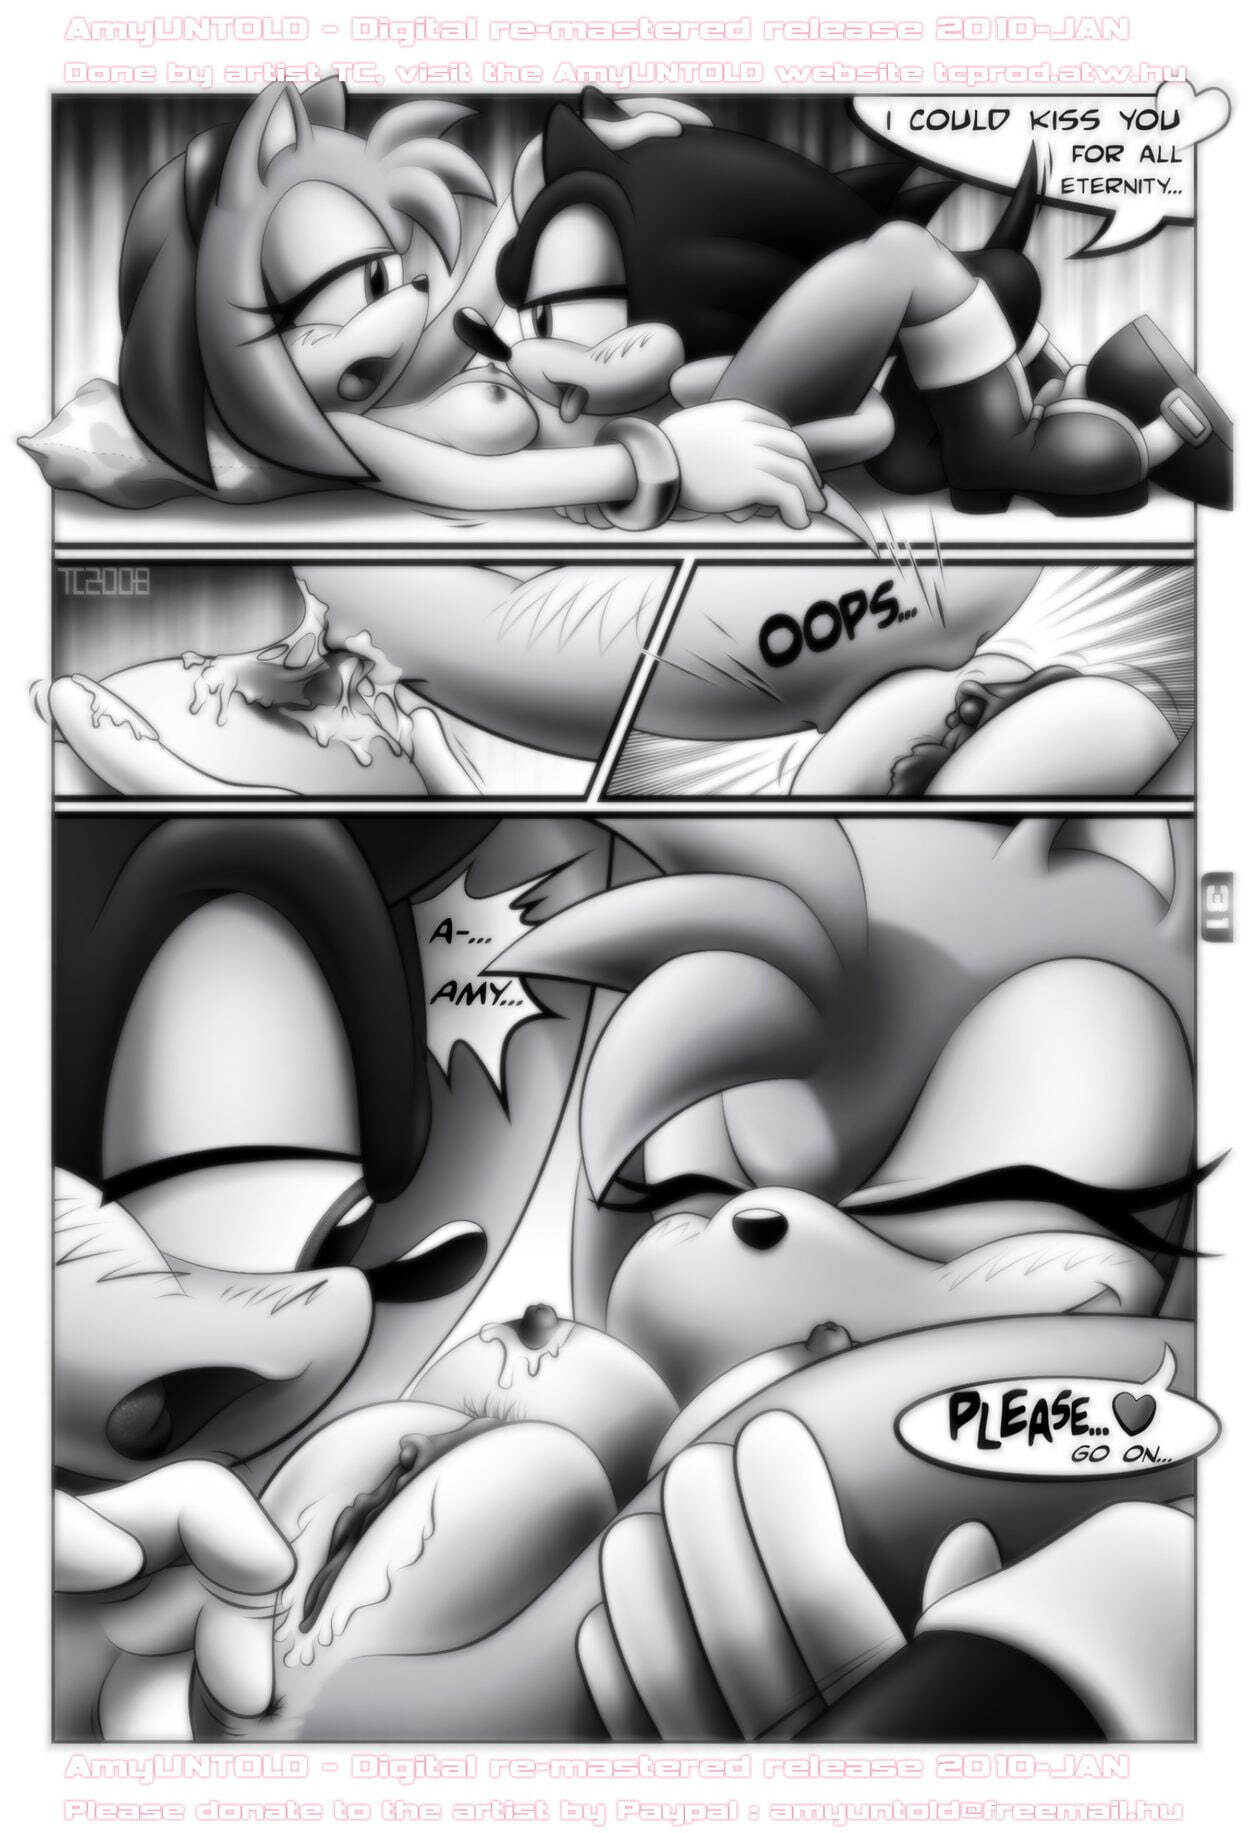 Amy Untold - Finally - Page 31